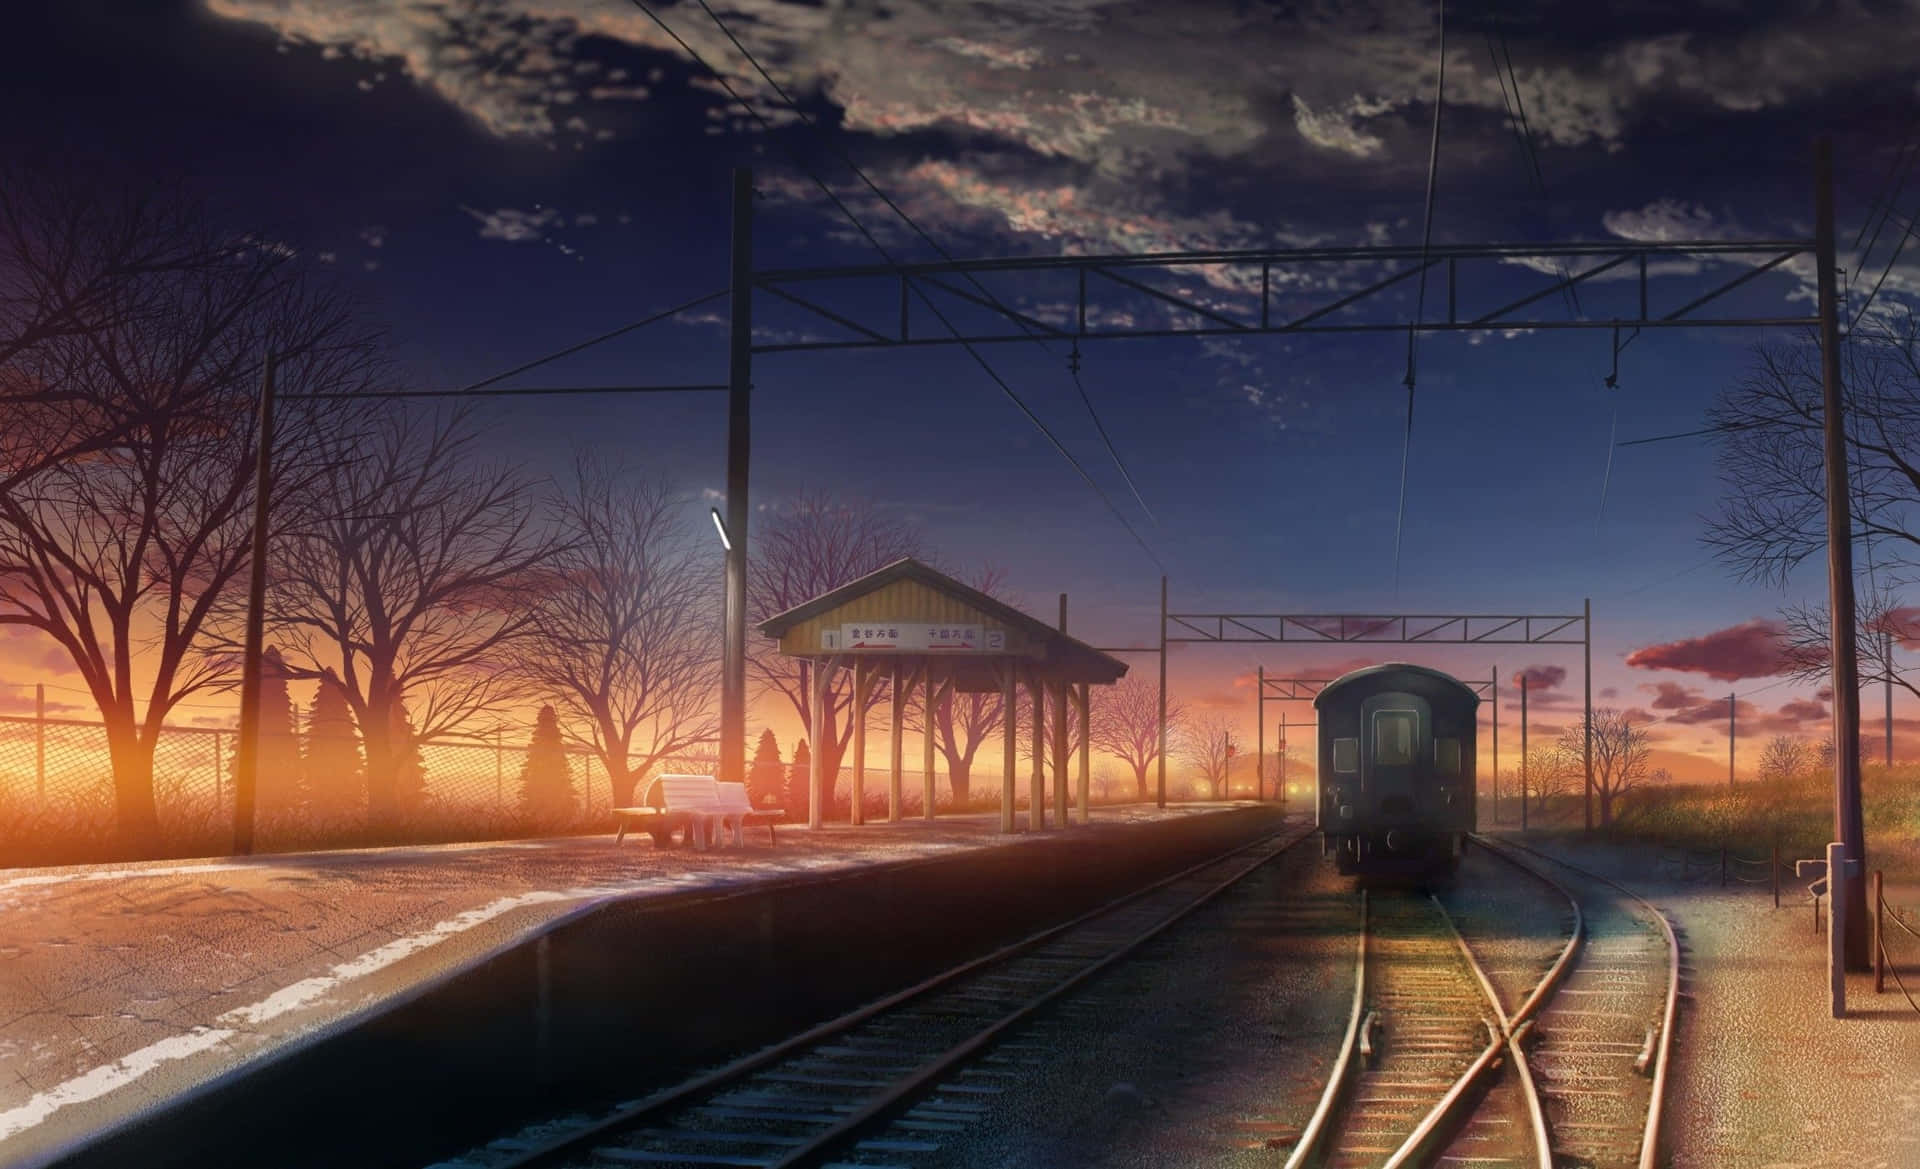 Two characters, together on a train in 5 Centimeters Per Second